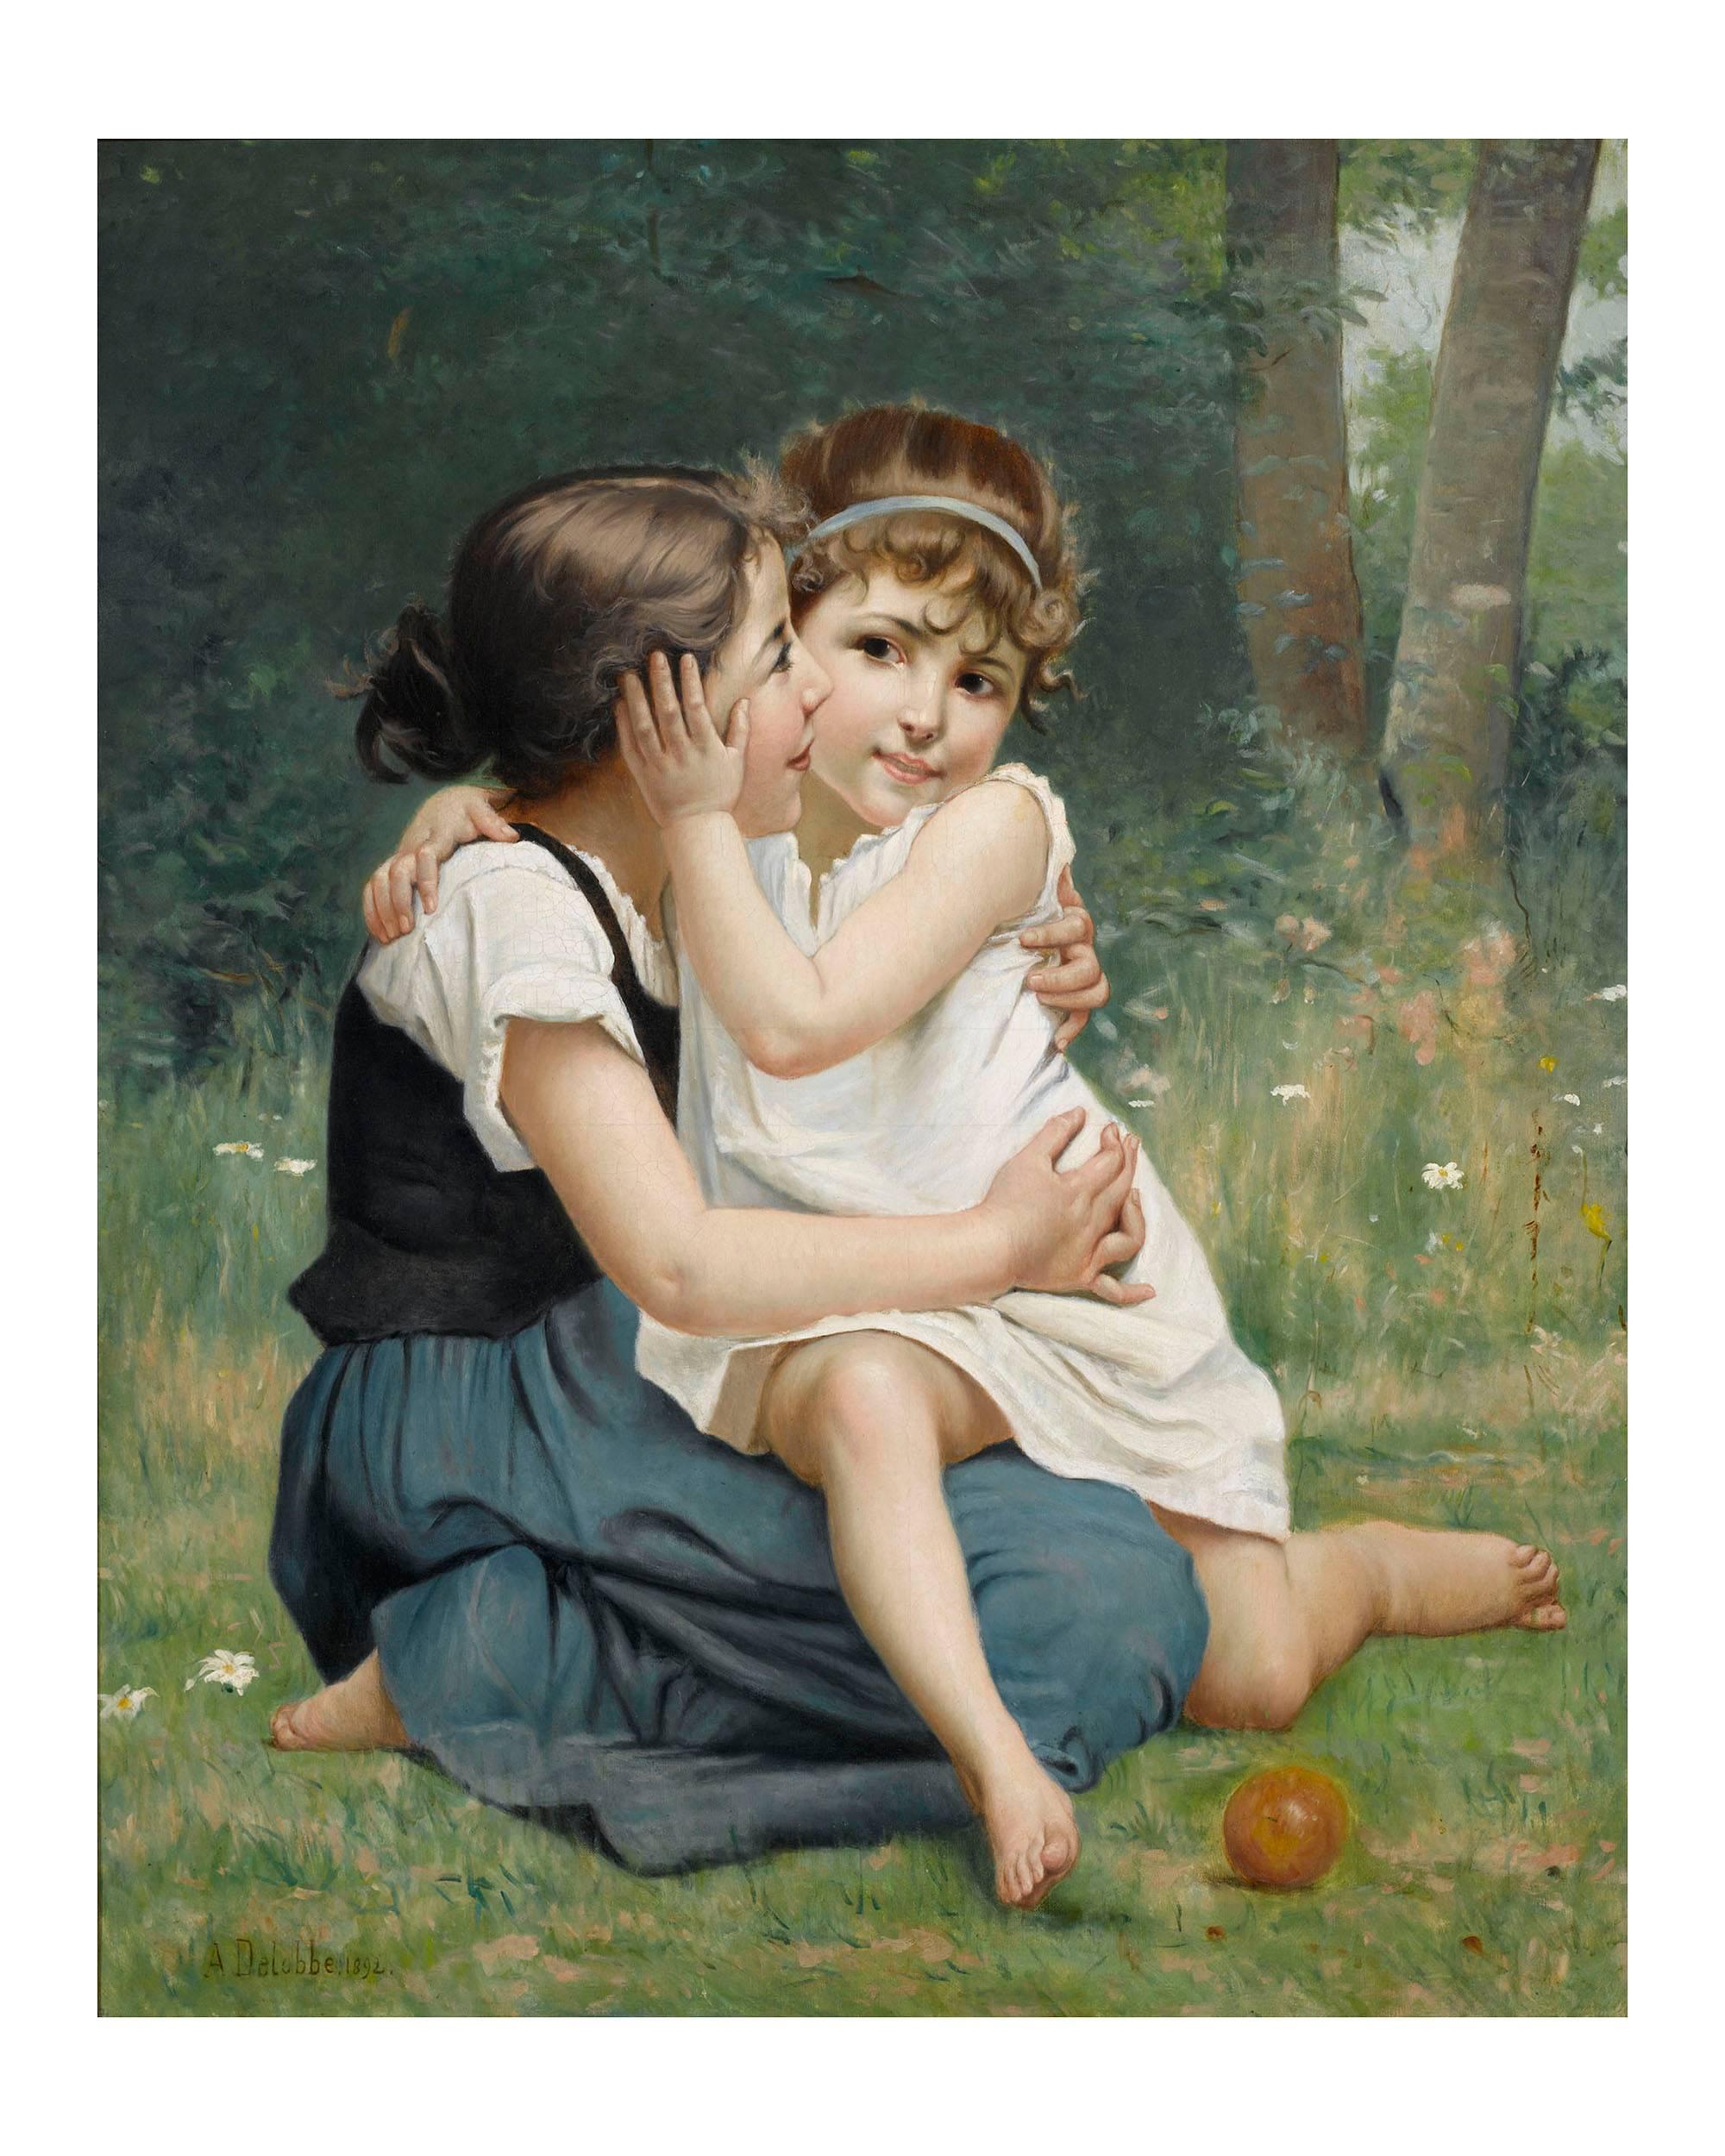 François Alfred Delobbe
1835-1920 French

Sisterly love

Oil on canvas
Signed and dated 